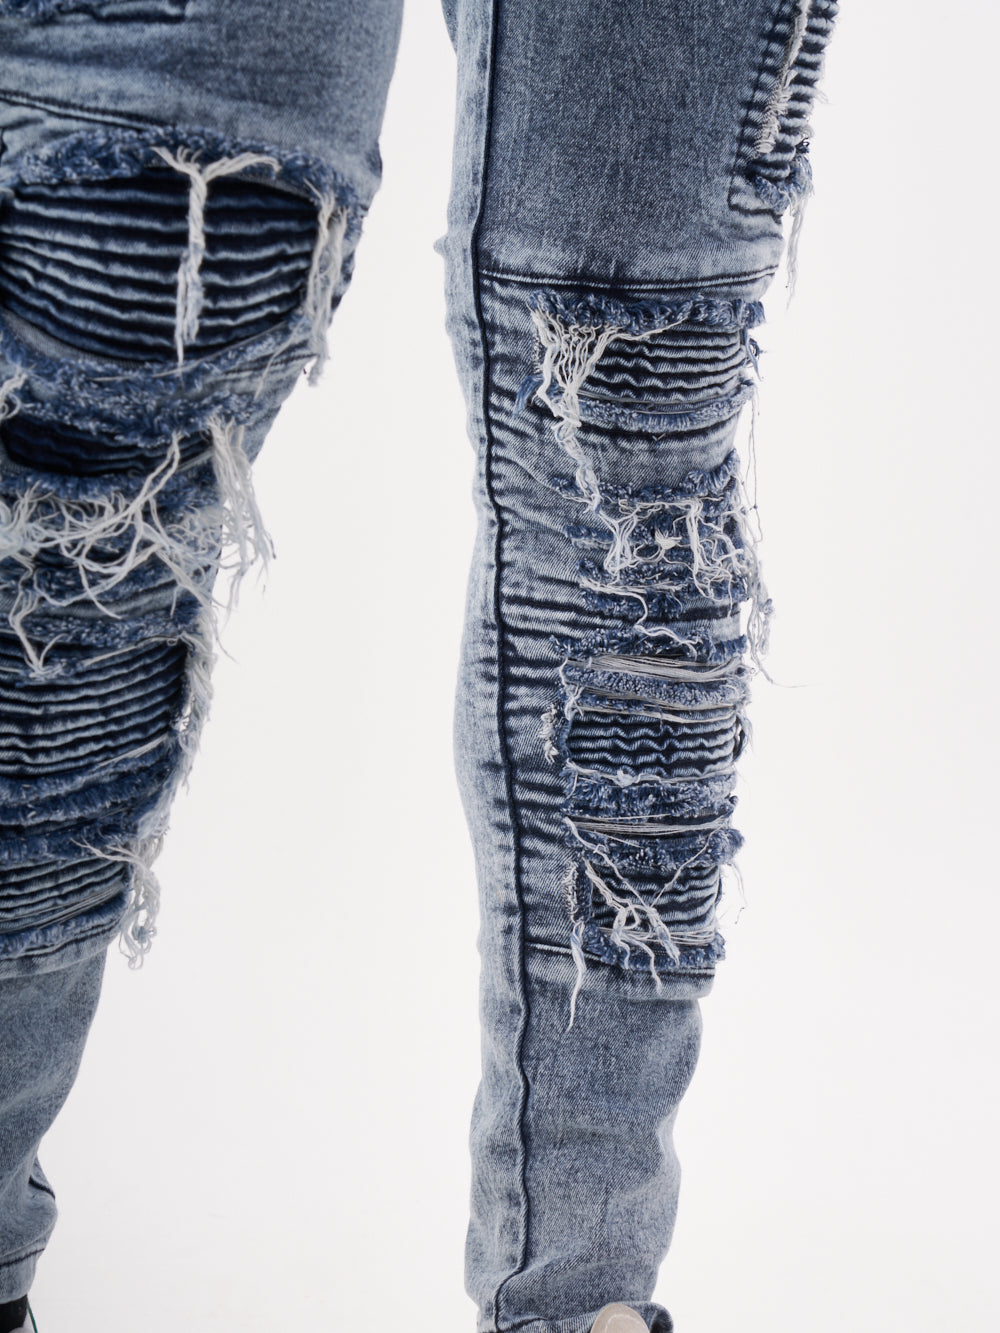 The legs of a man wearing RADICAL jeans.